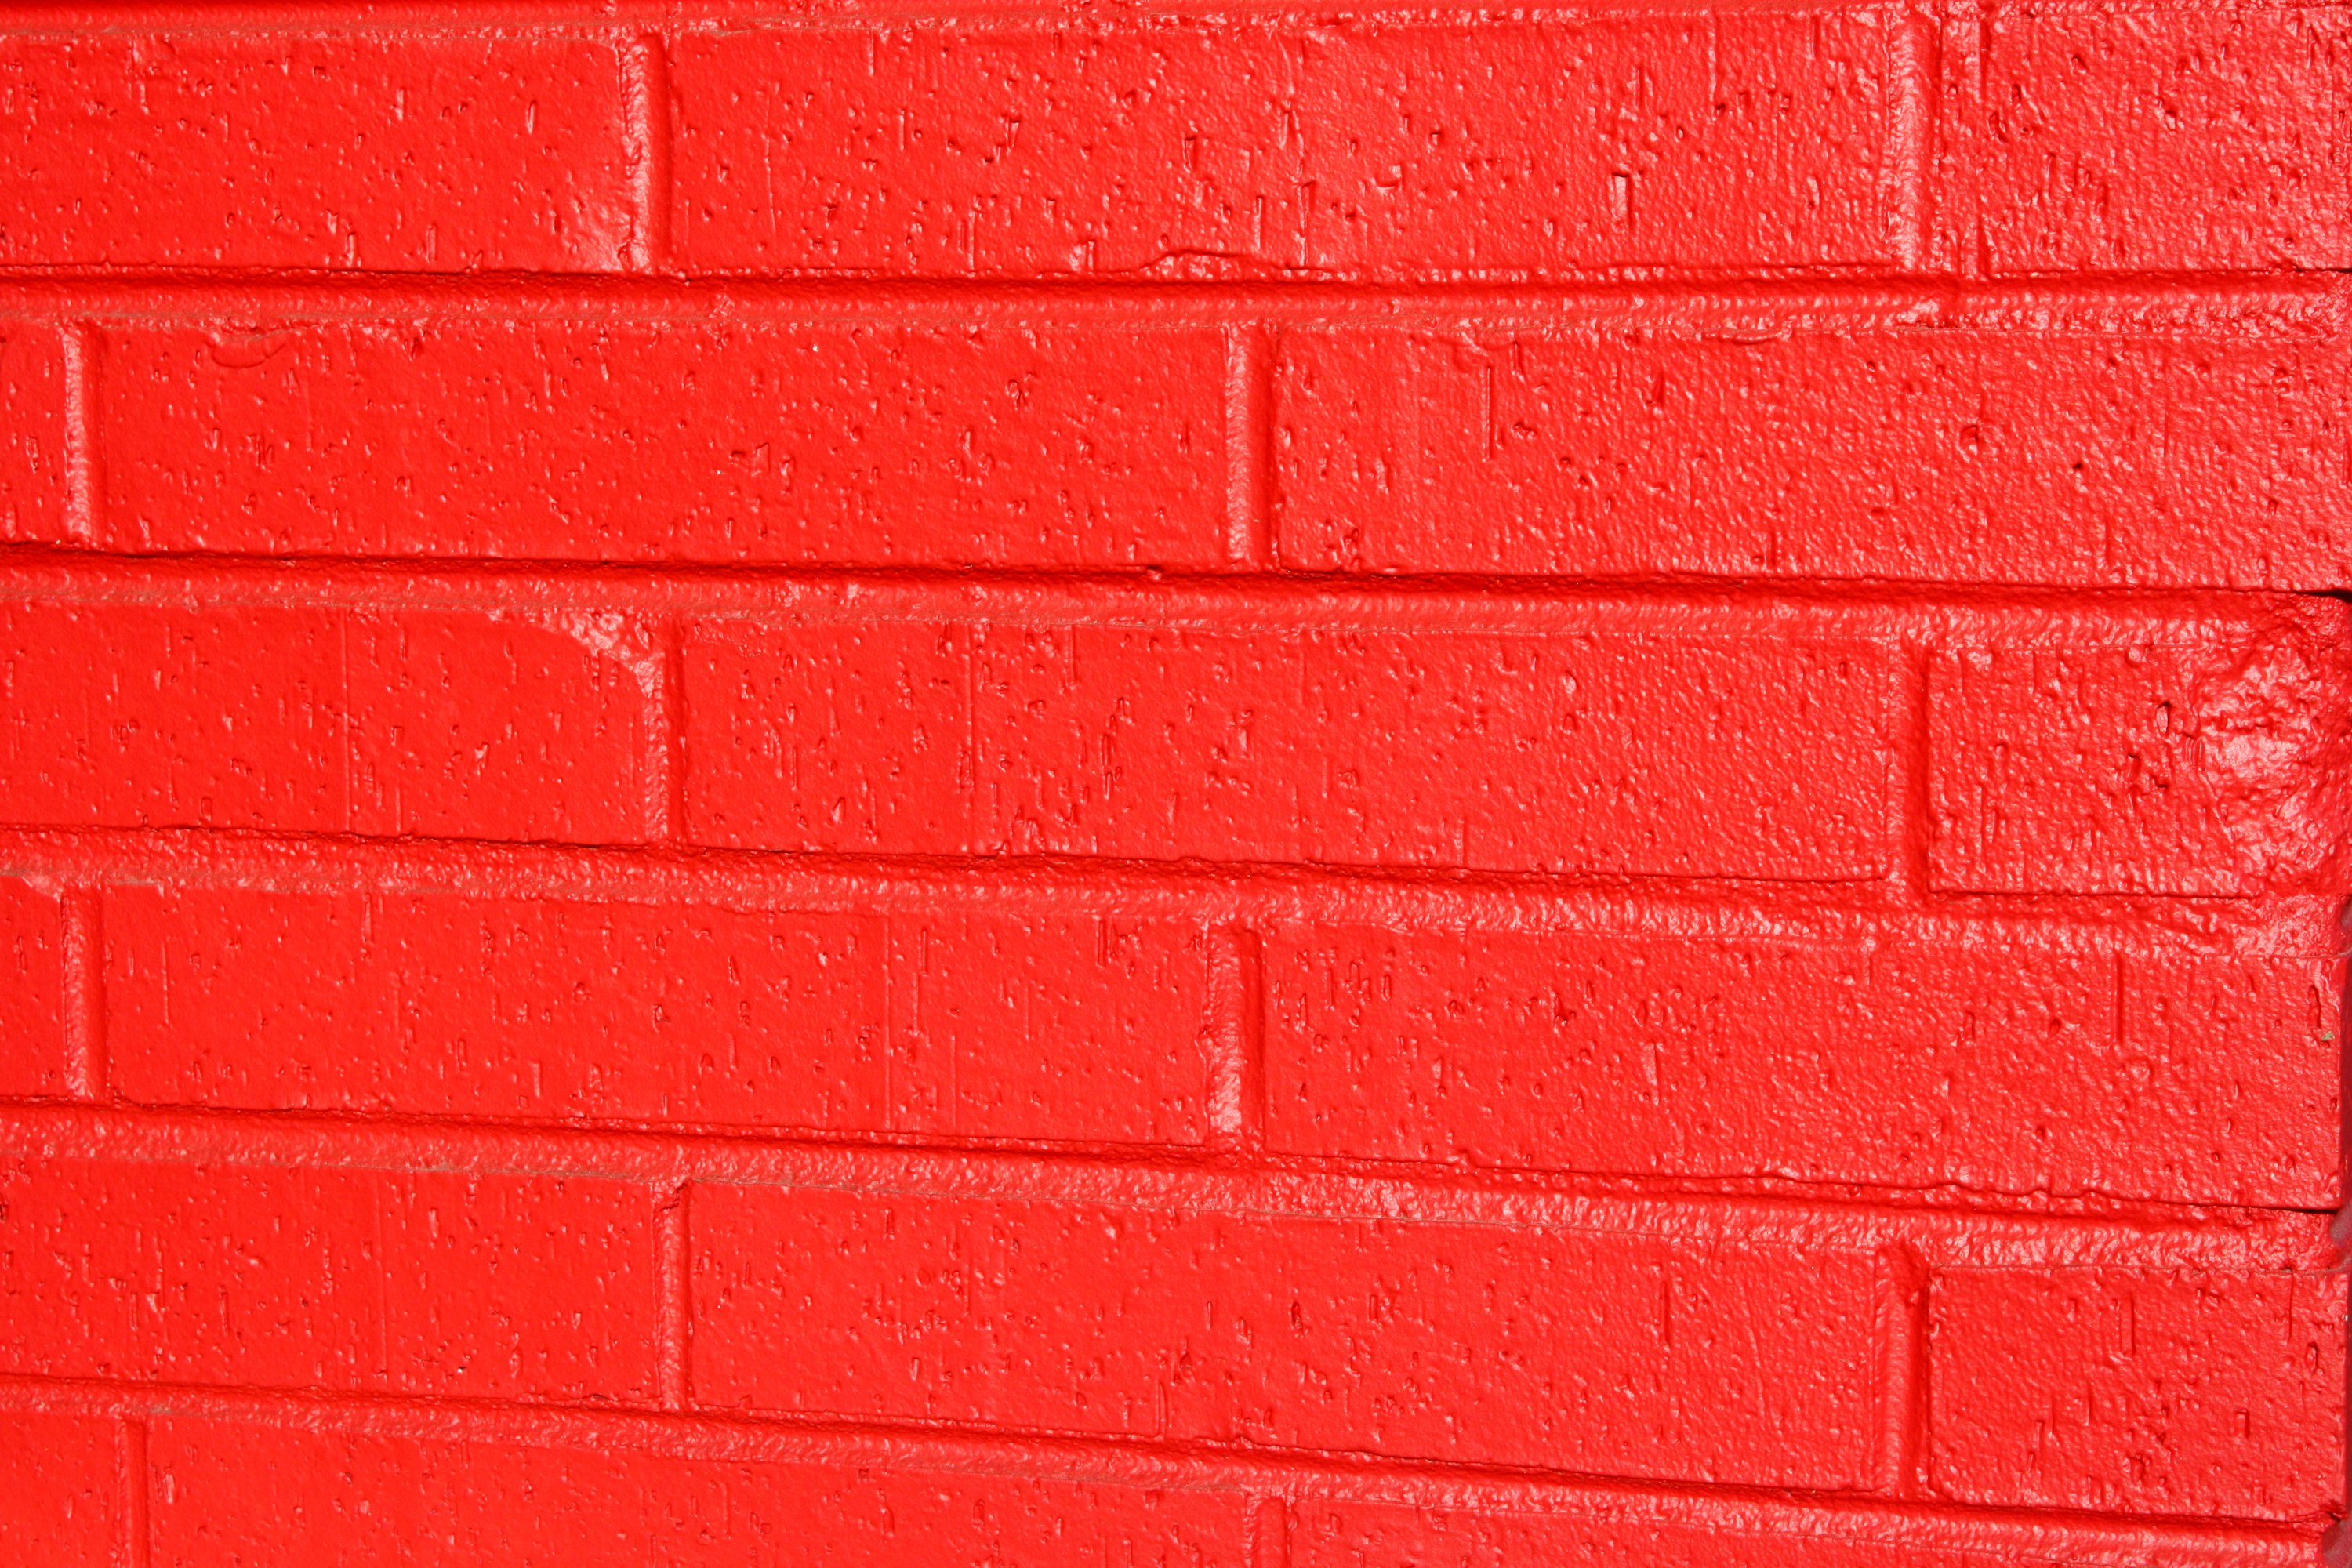 Features A Close Up Of Brick Wall That Has Been Painted Bright Red